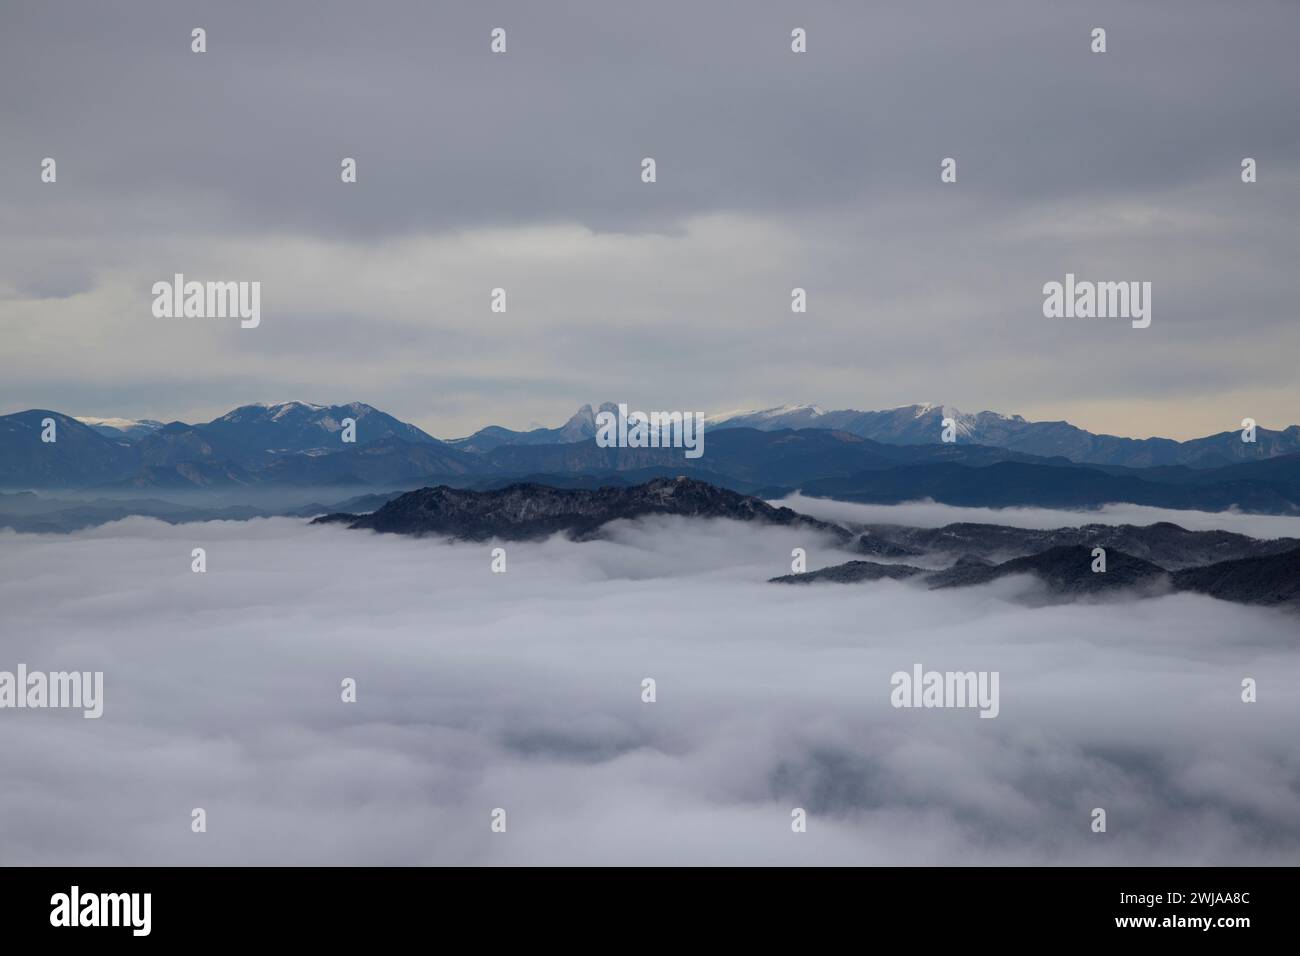 A scenic view of Pedraforca mountain in Catalonia, enveloped in mist Stock Photo